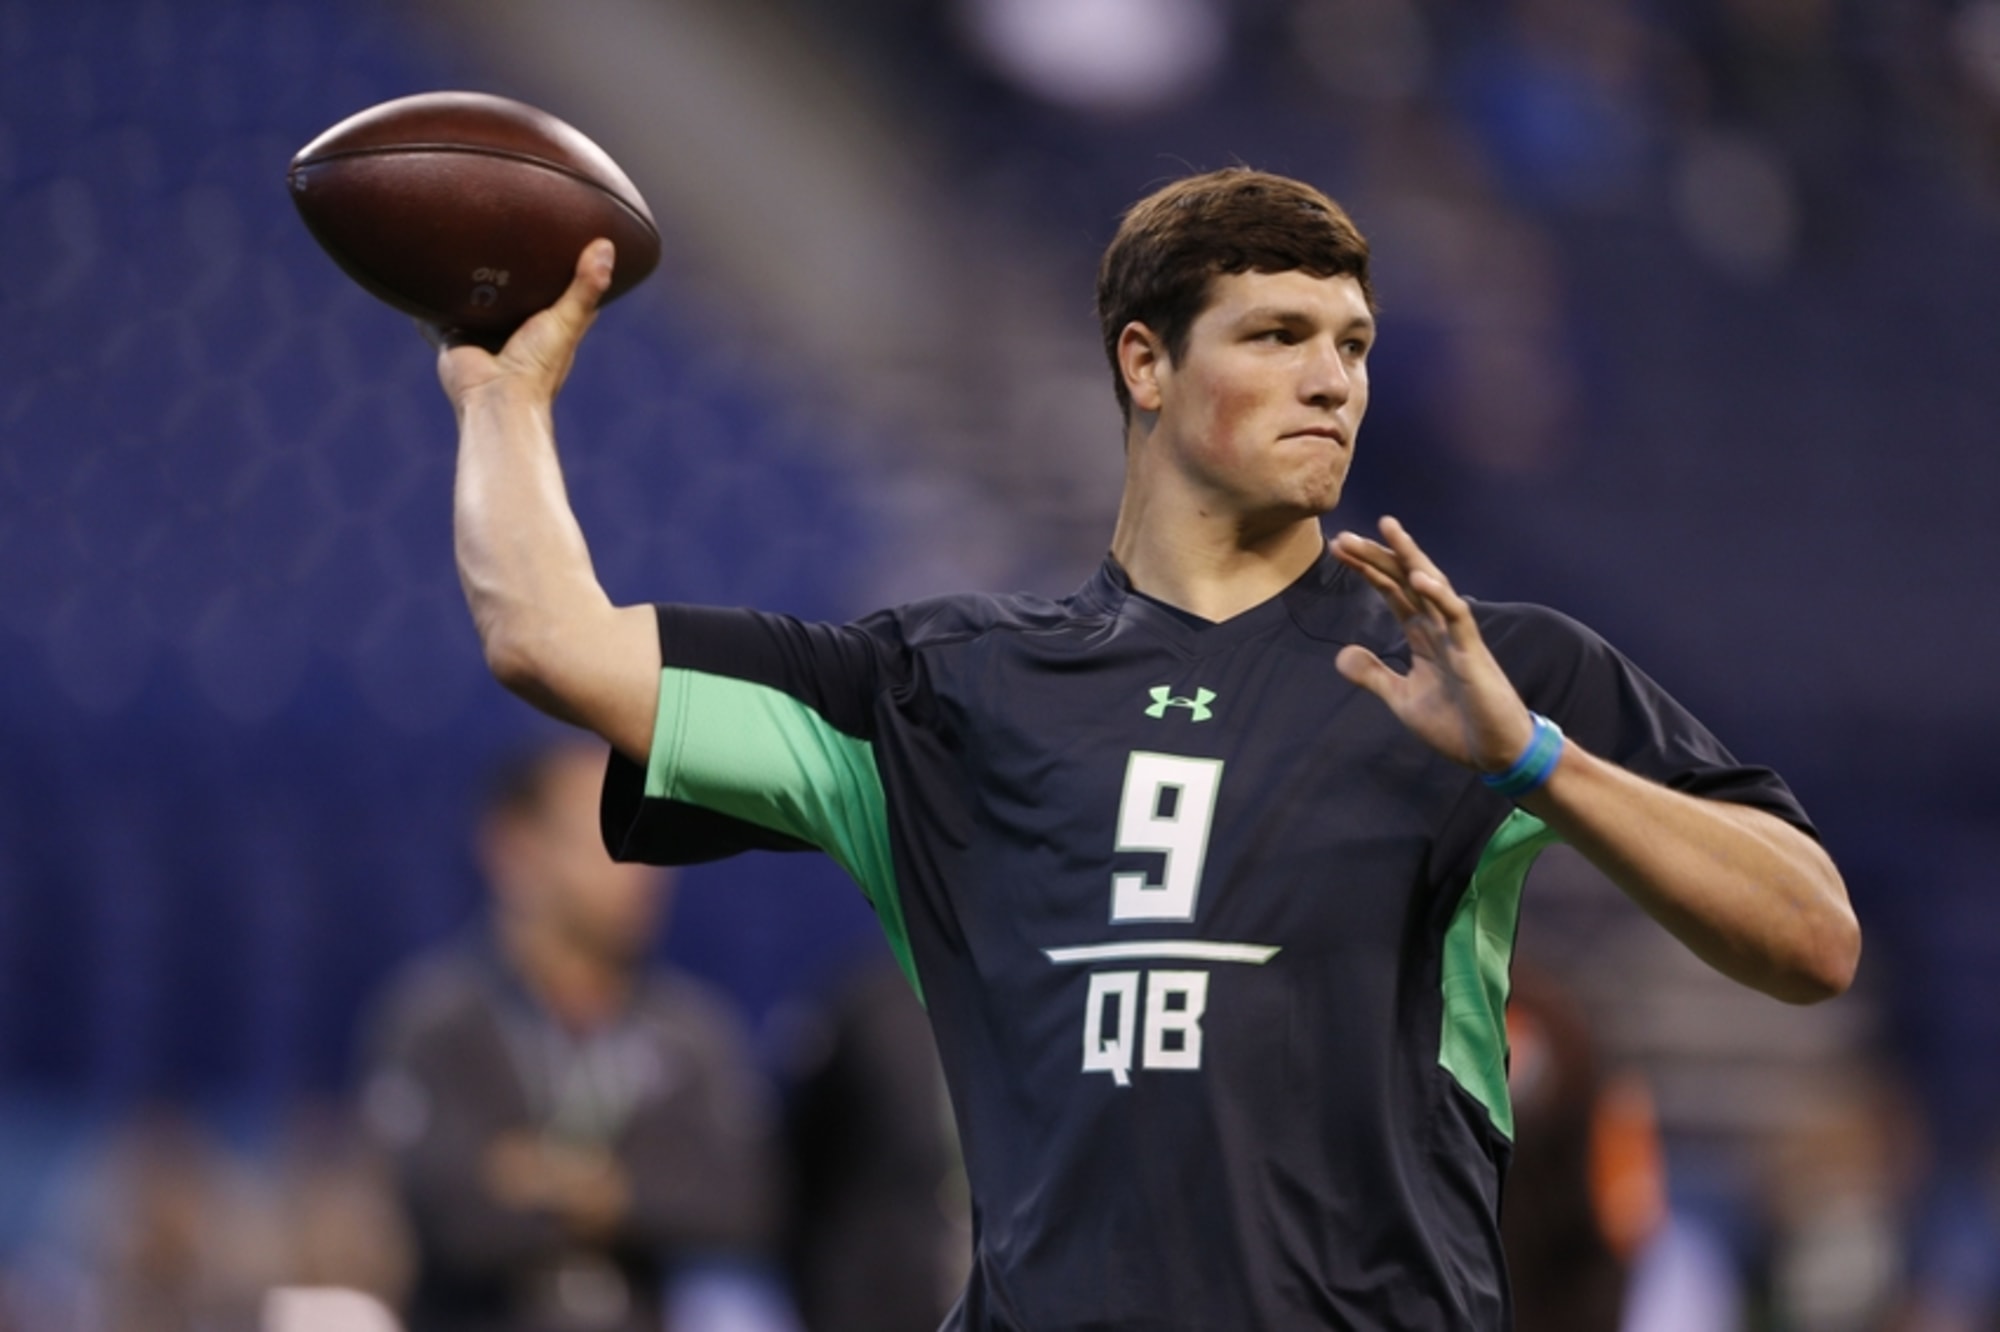 Christian Hackenberg struggles, meets with Texans at combine